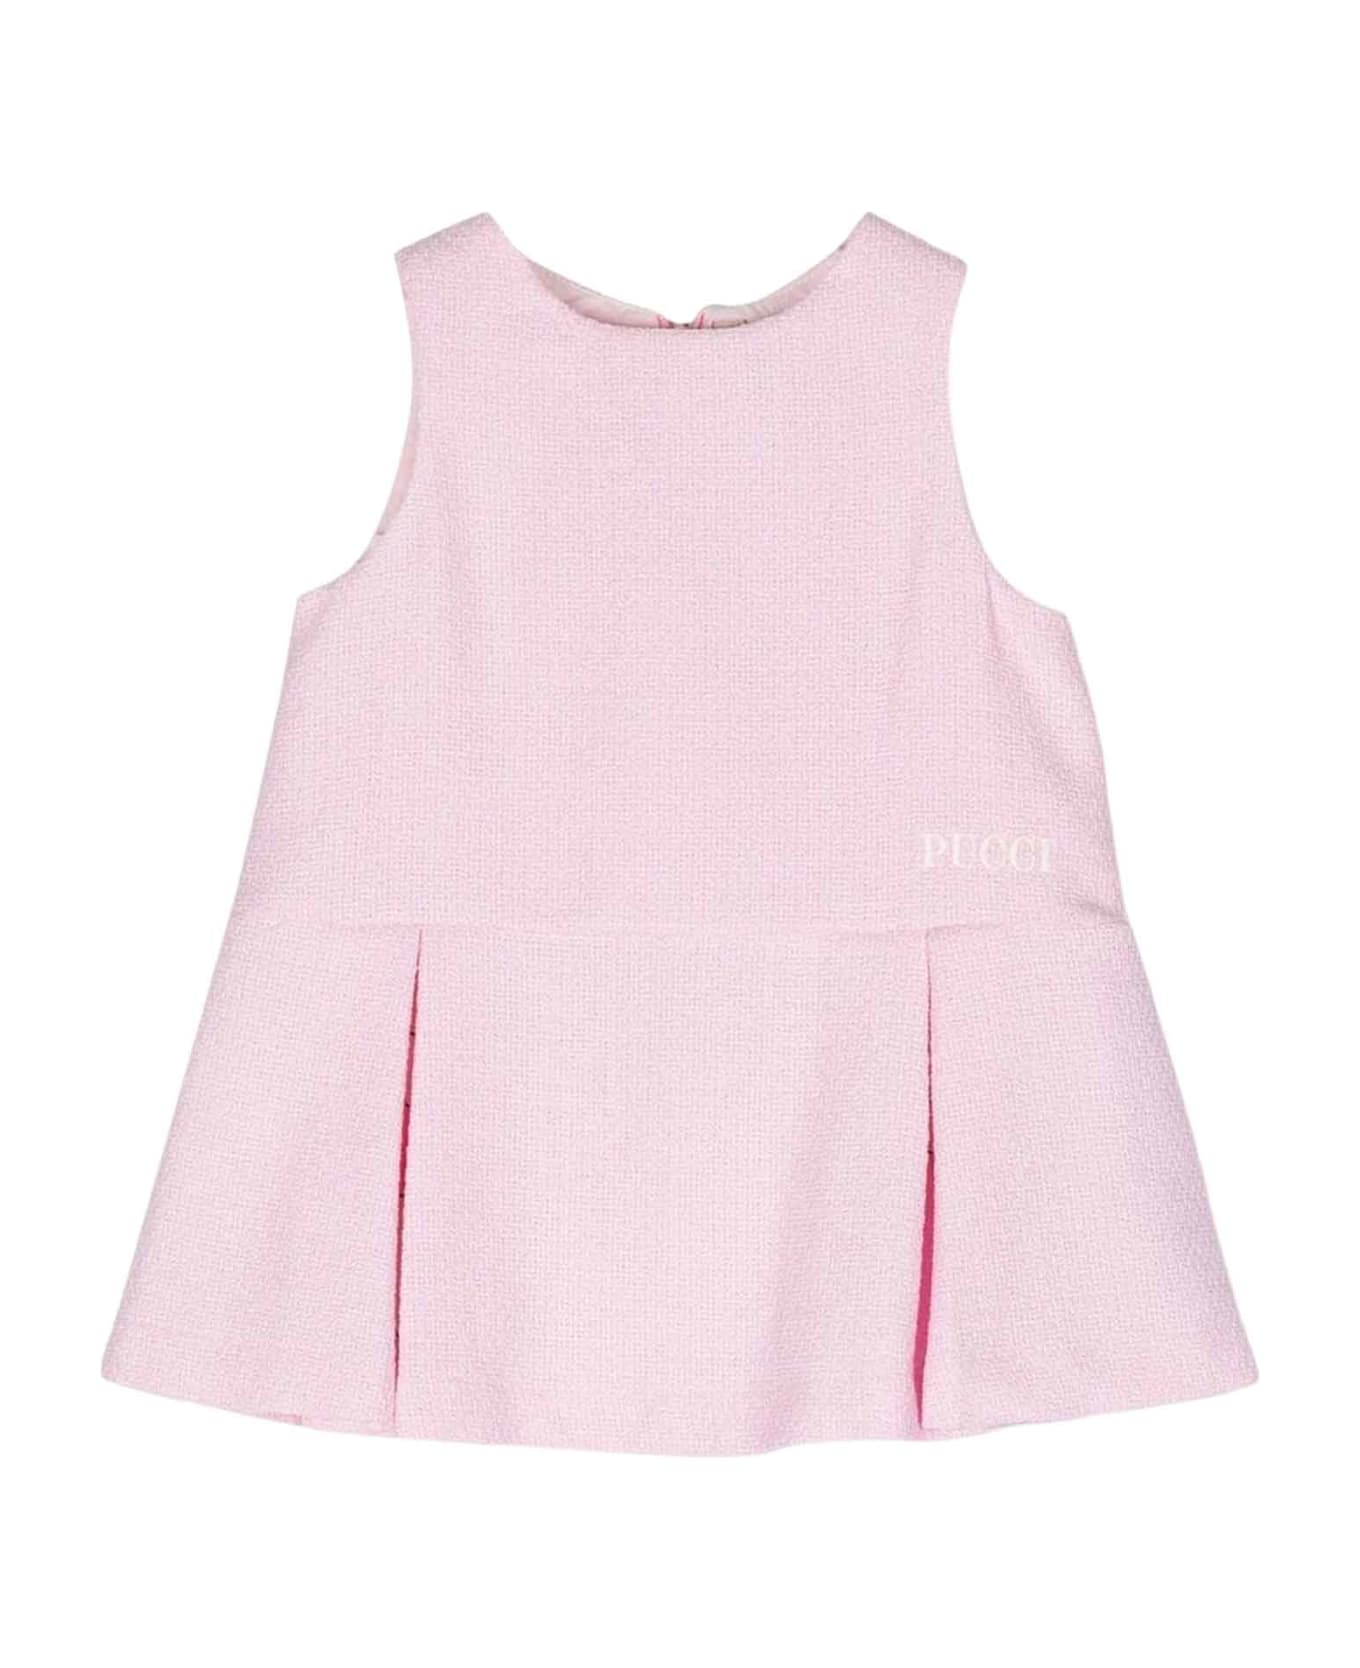 Emilio Pucci Pink Dress Baby Girl - Rosa